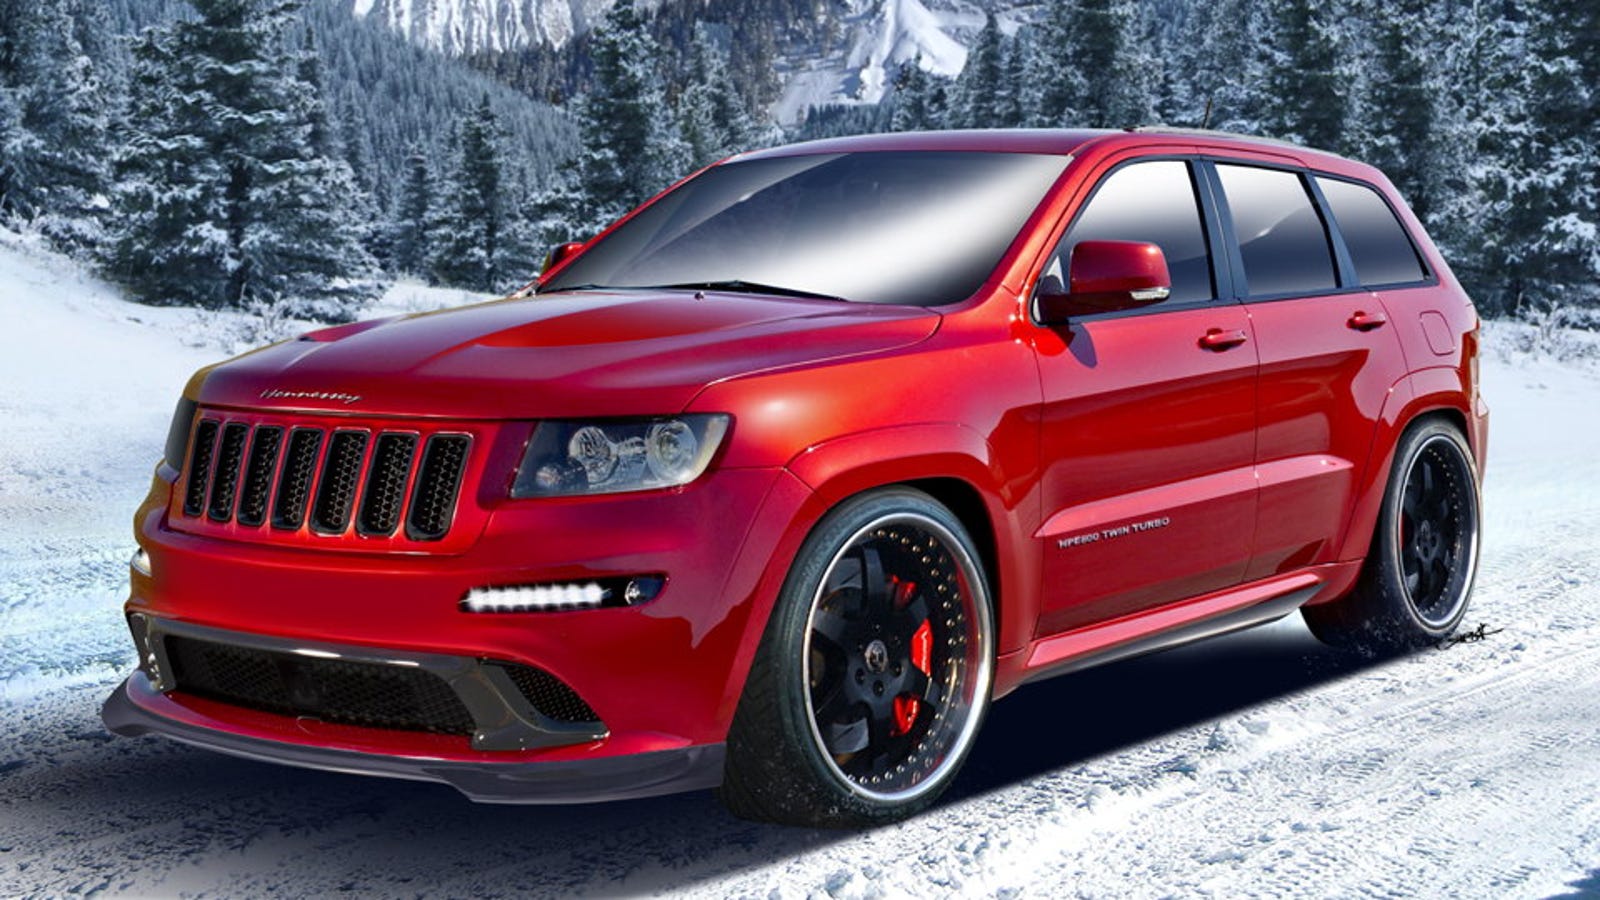 This 235,000 Jeep SRT8 is quicker than a Porsche Turbo